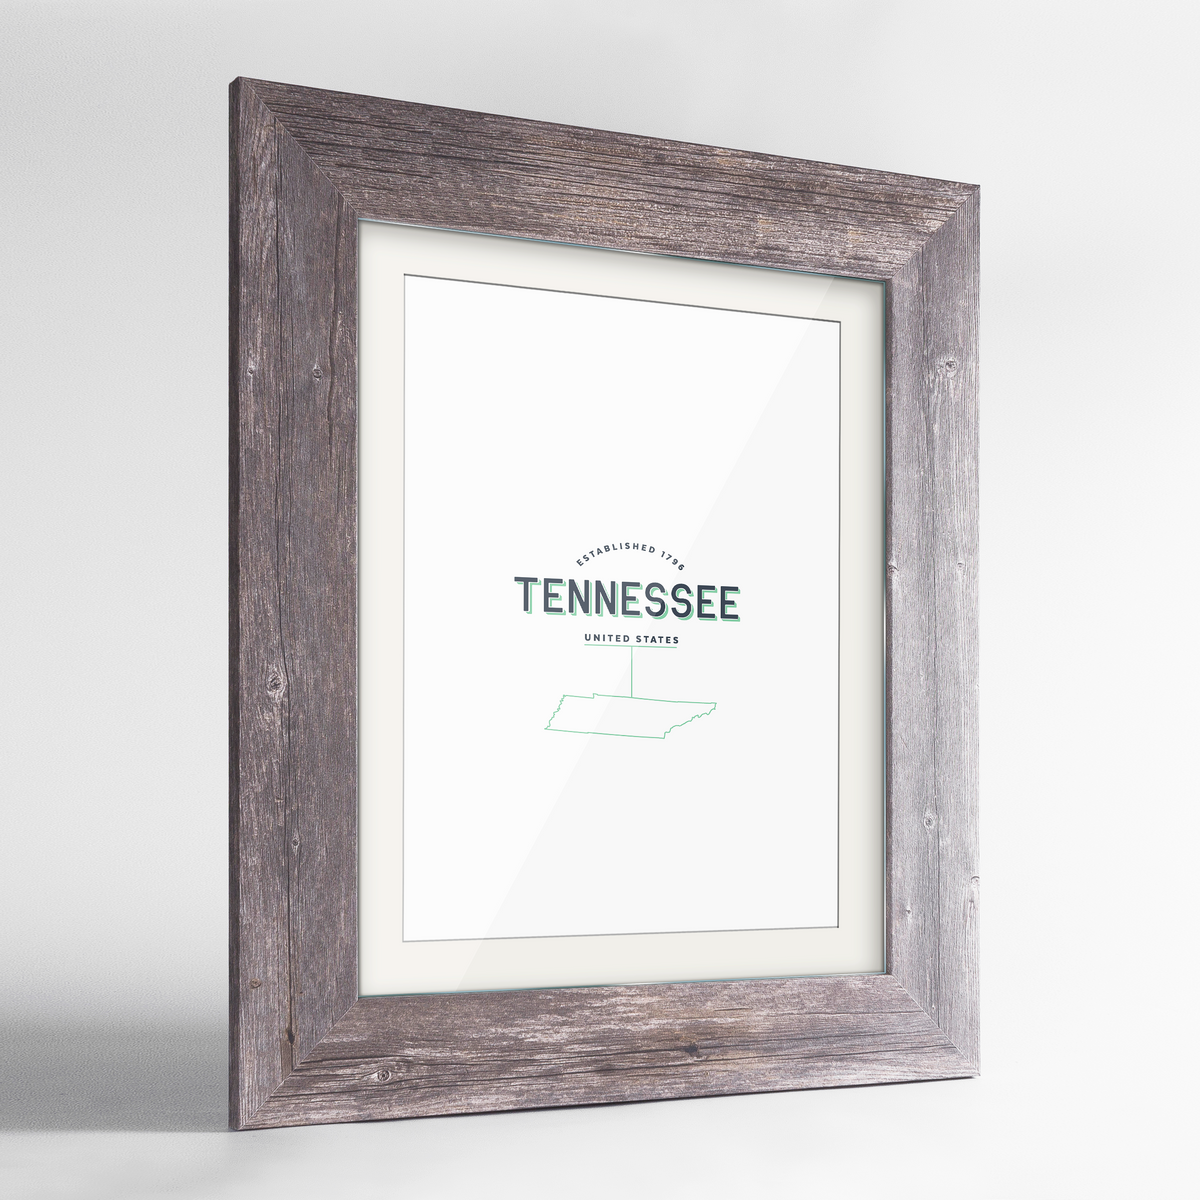 Tennessee Word Art Frame Print - State Line